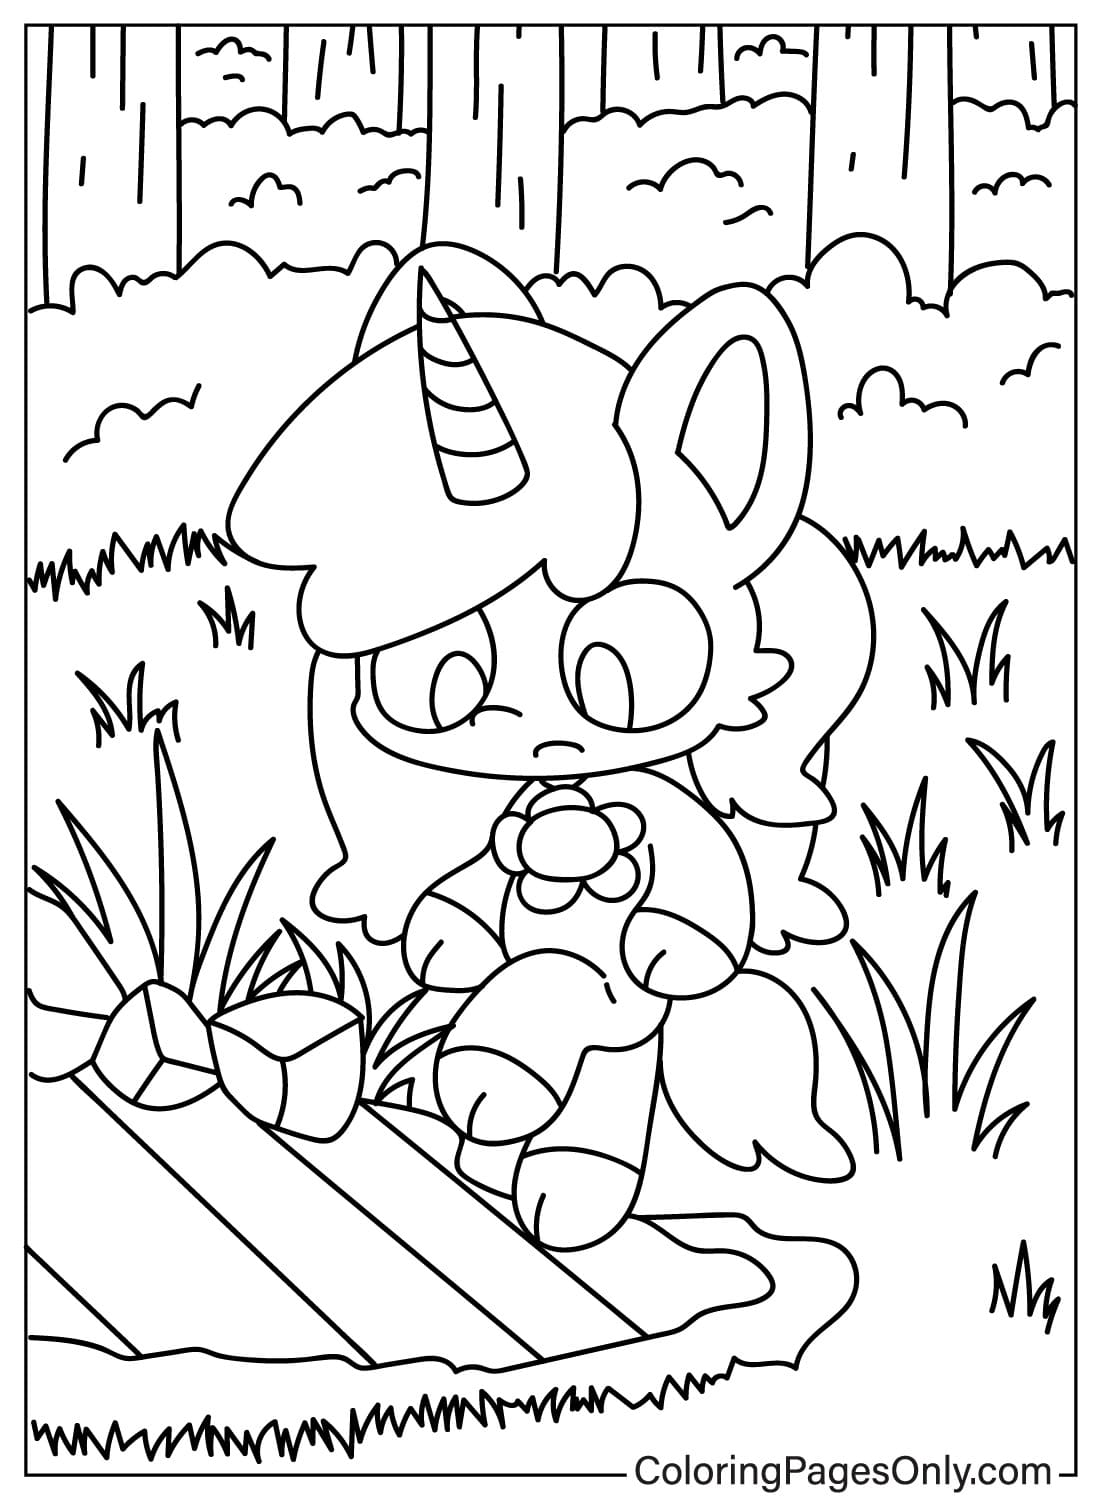 CraftyCorn Free Coloring Page from CraftyCorn